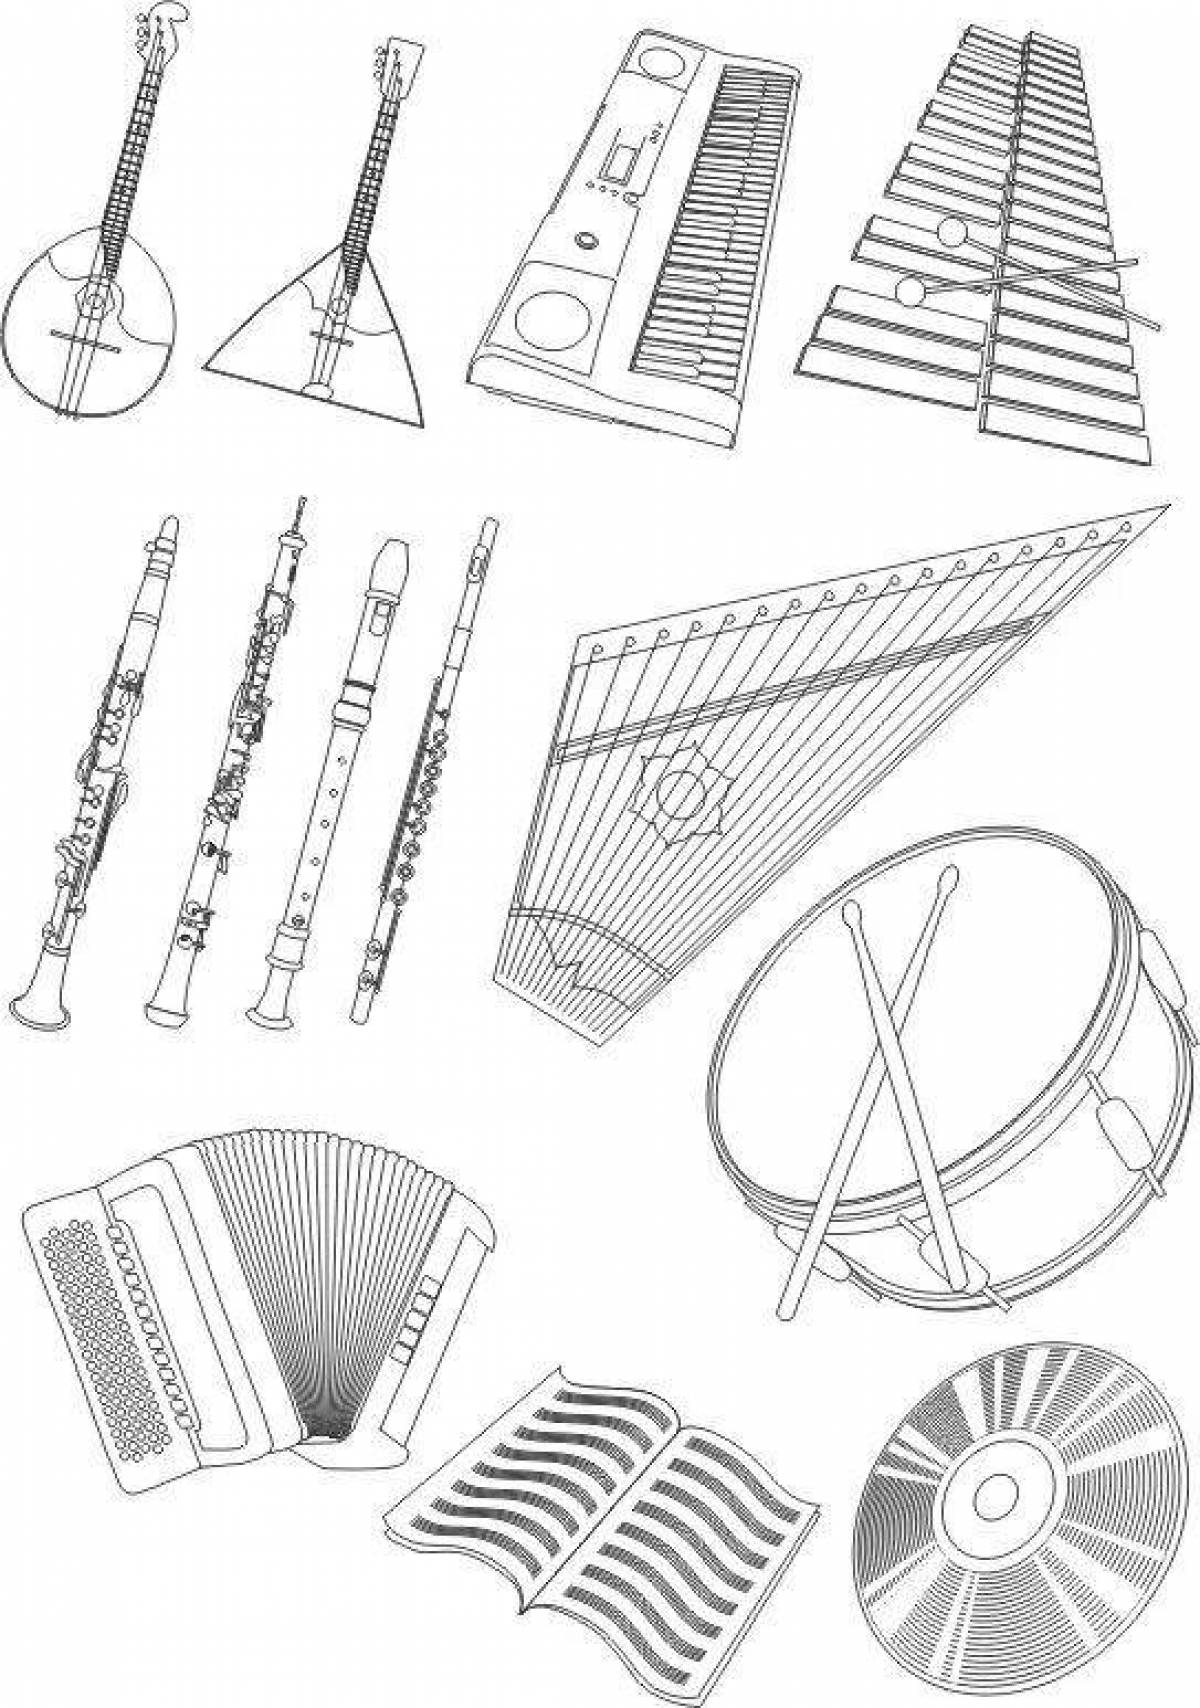 Coloring page charming Russian folk musical instruments